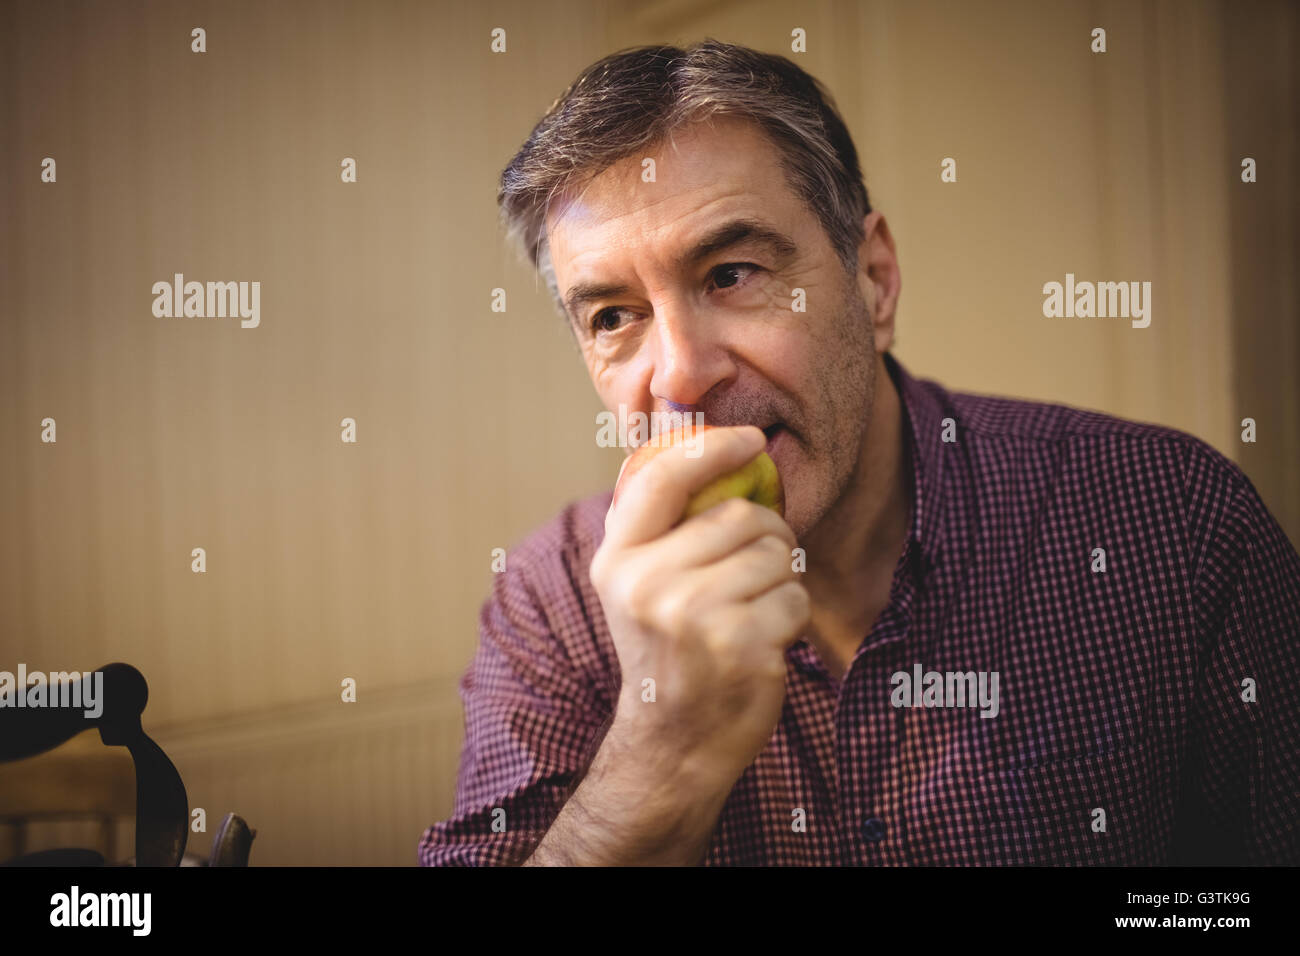 Man eating an apple Banque D'Images